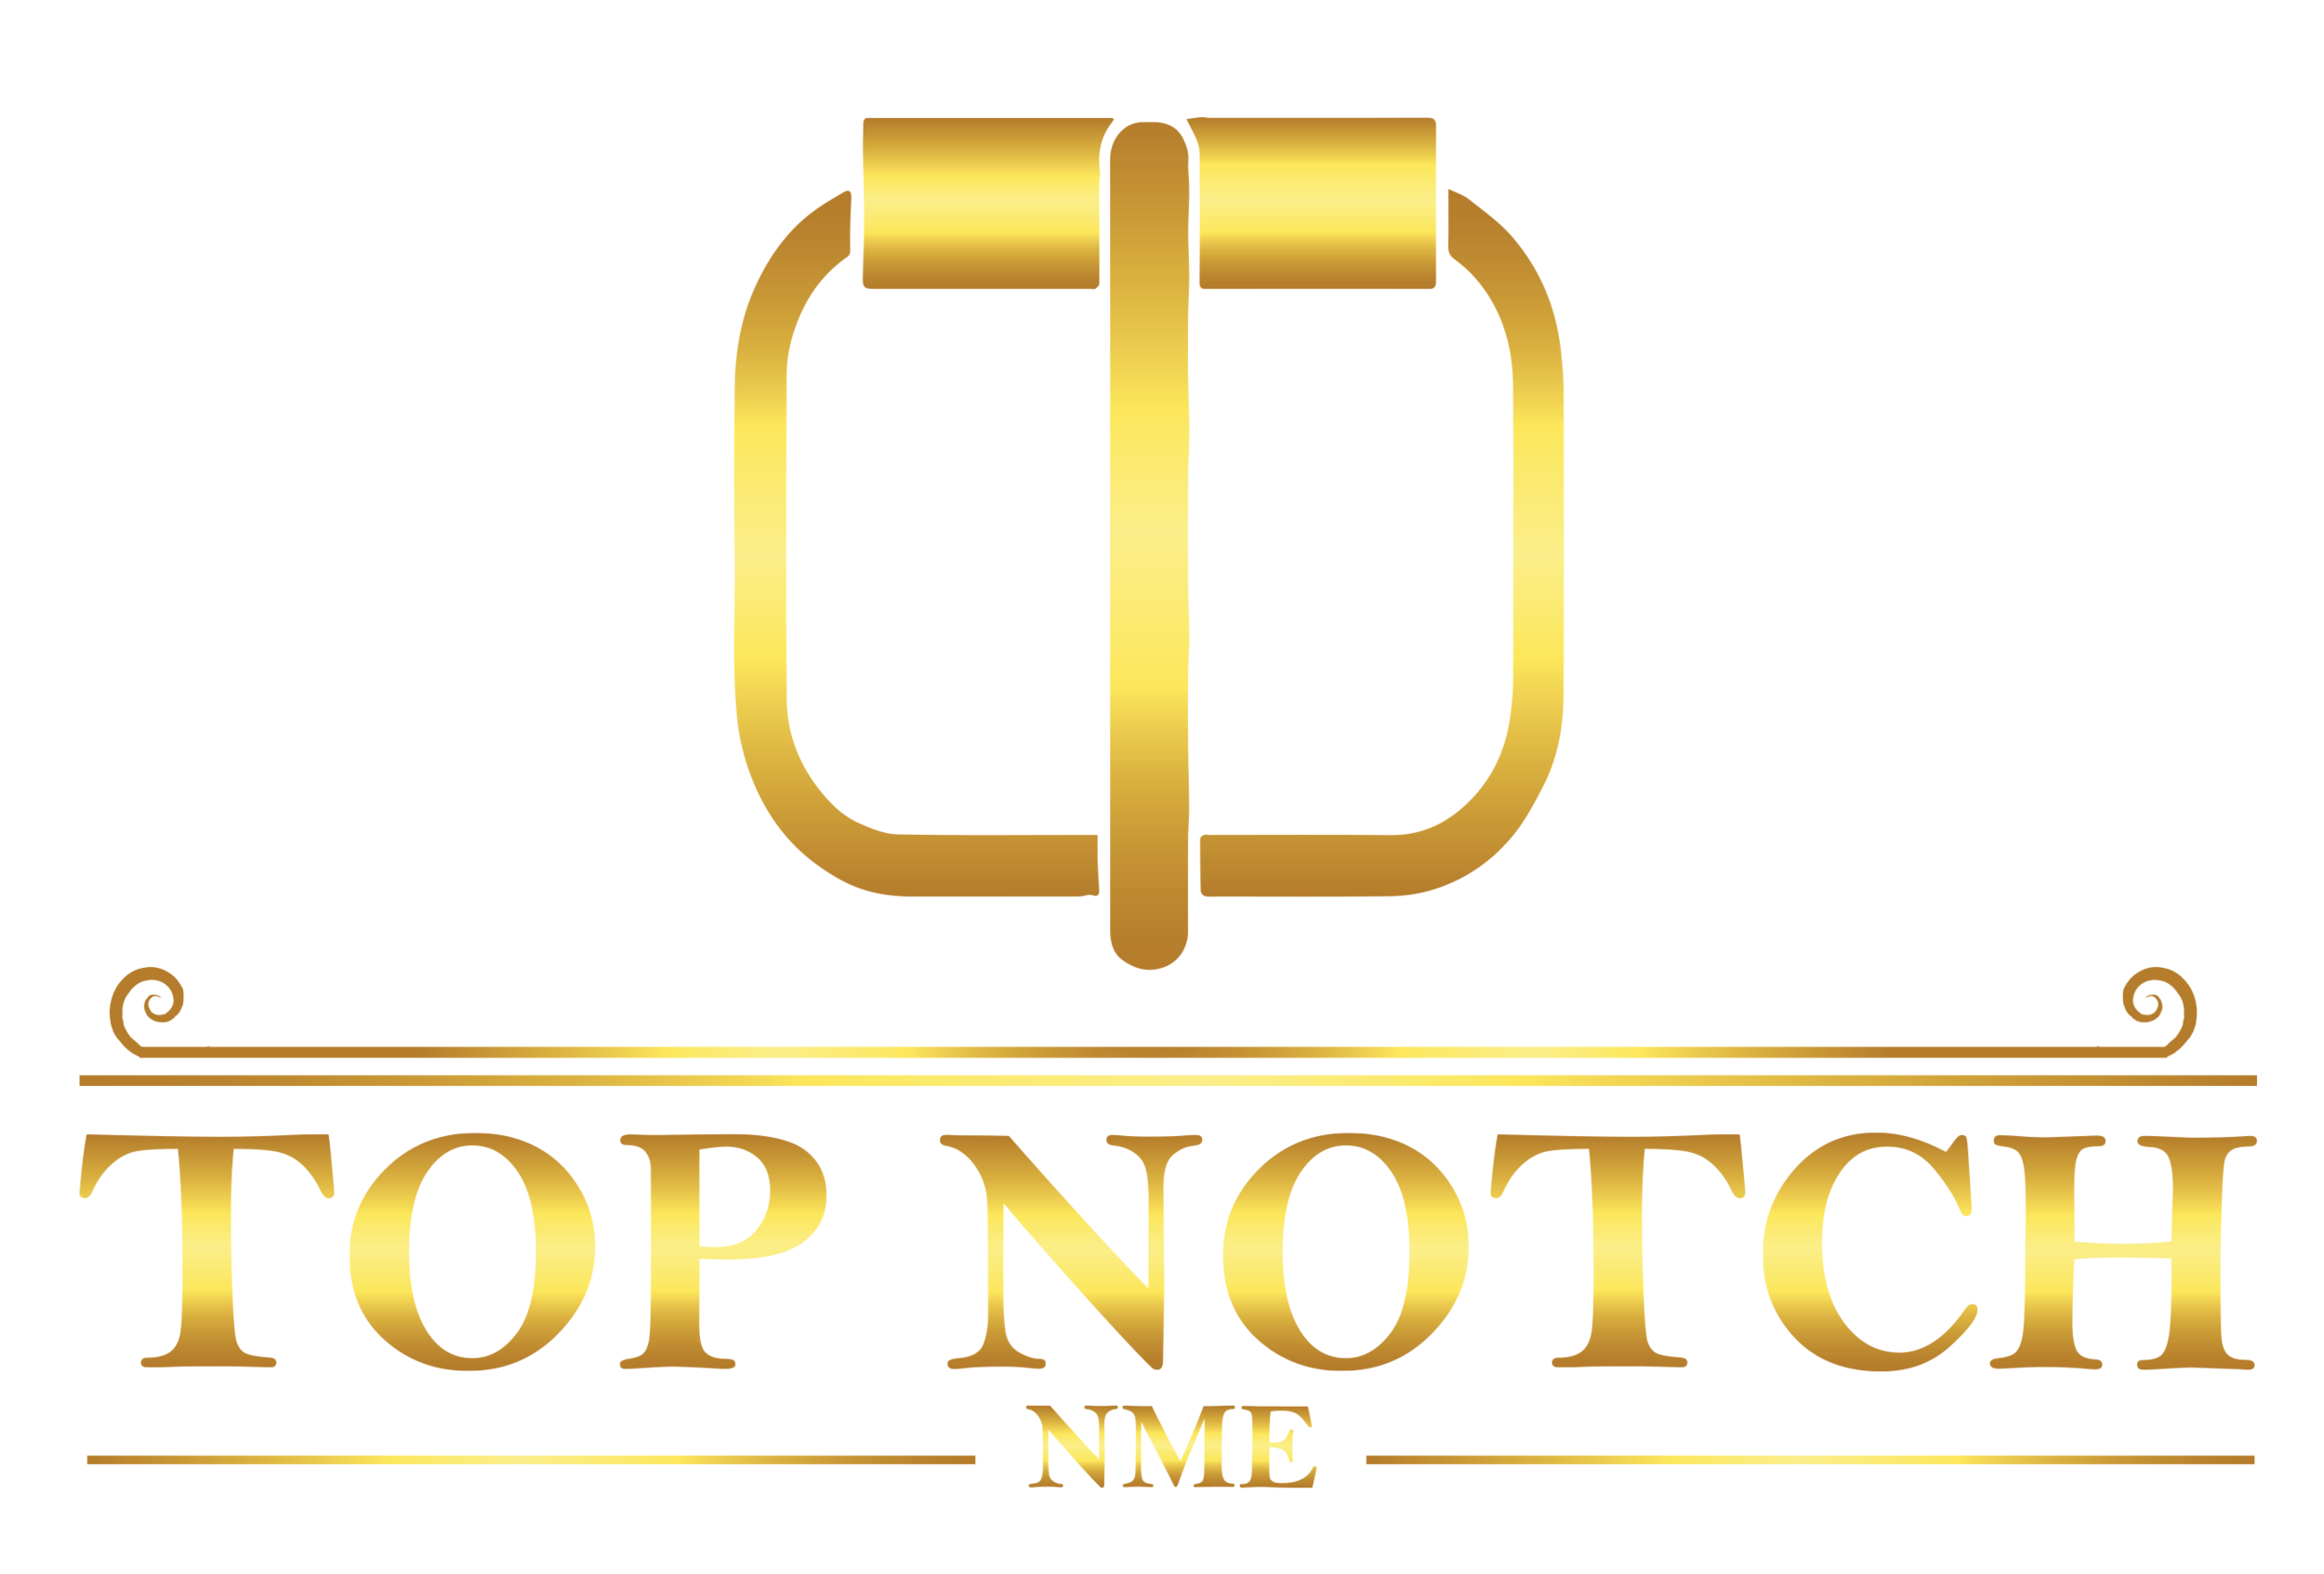 Top Notch NME®️ - Official Website